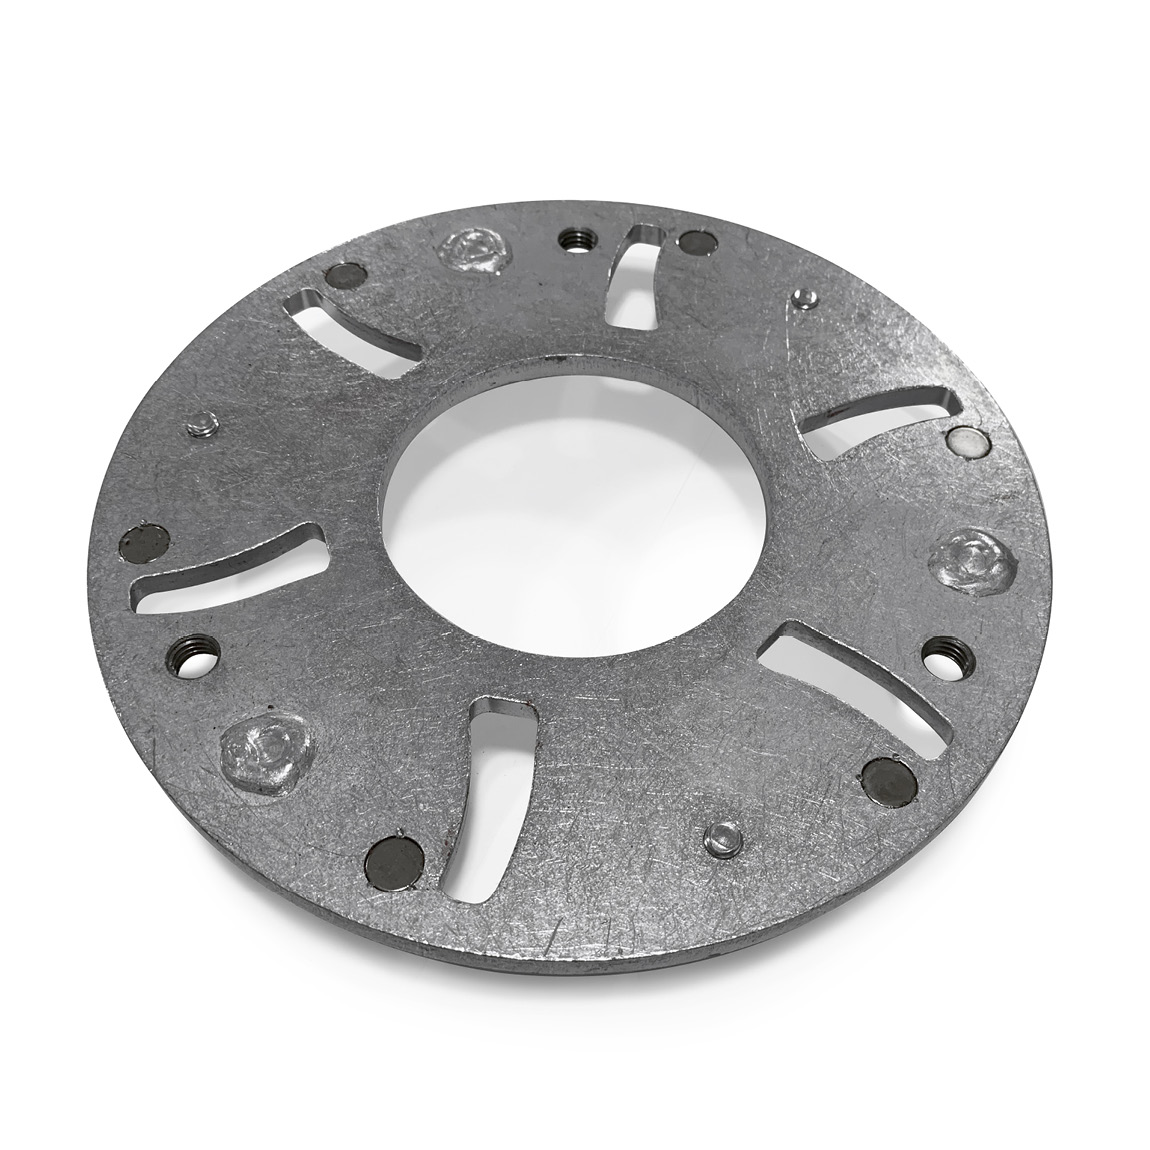 Grinding concrete abrasive holder for magnetic diamond grinding discs. This plate is designed to slot into the planetary arm plate system which can be attached to pedestrian and ride-on concrete trowels.